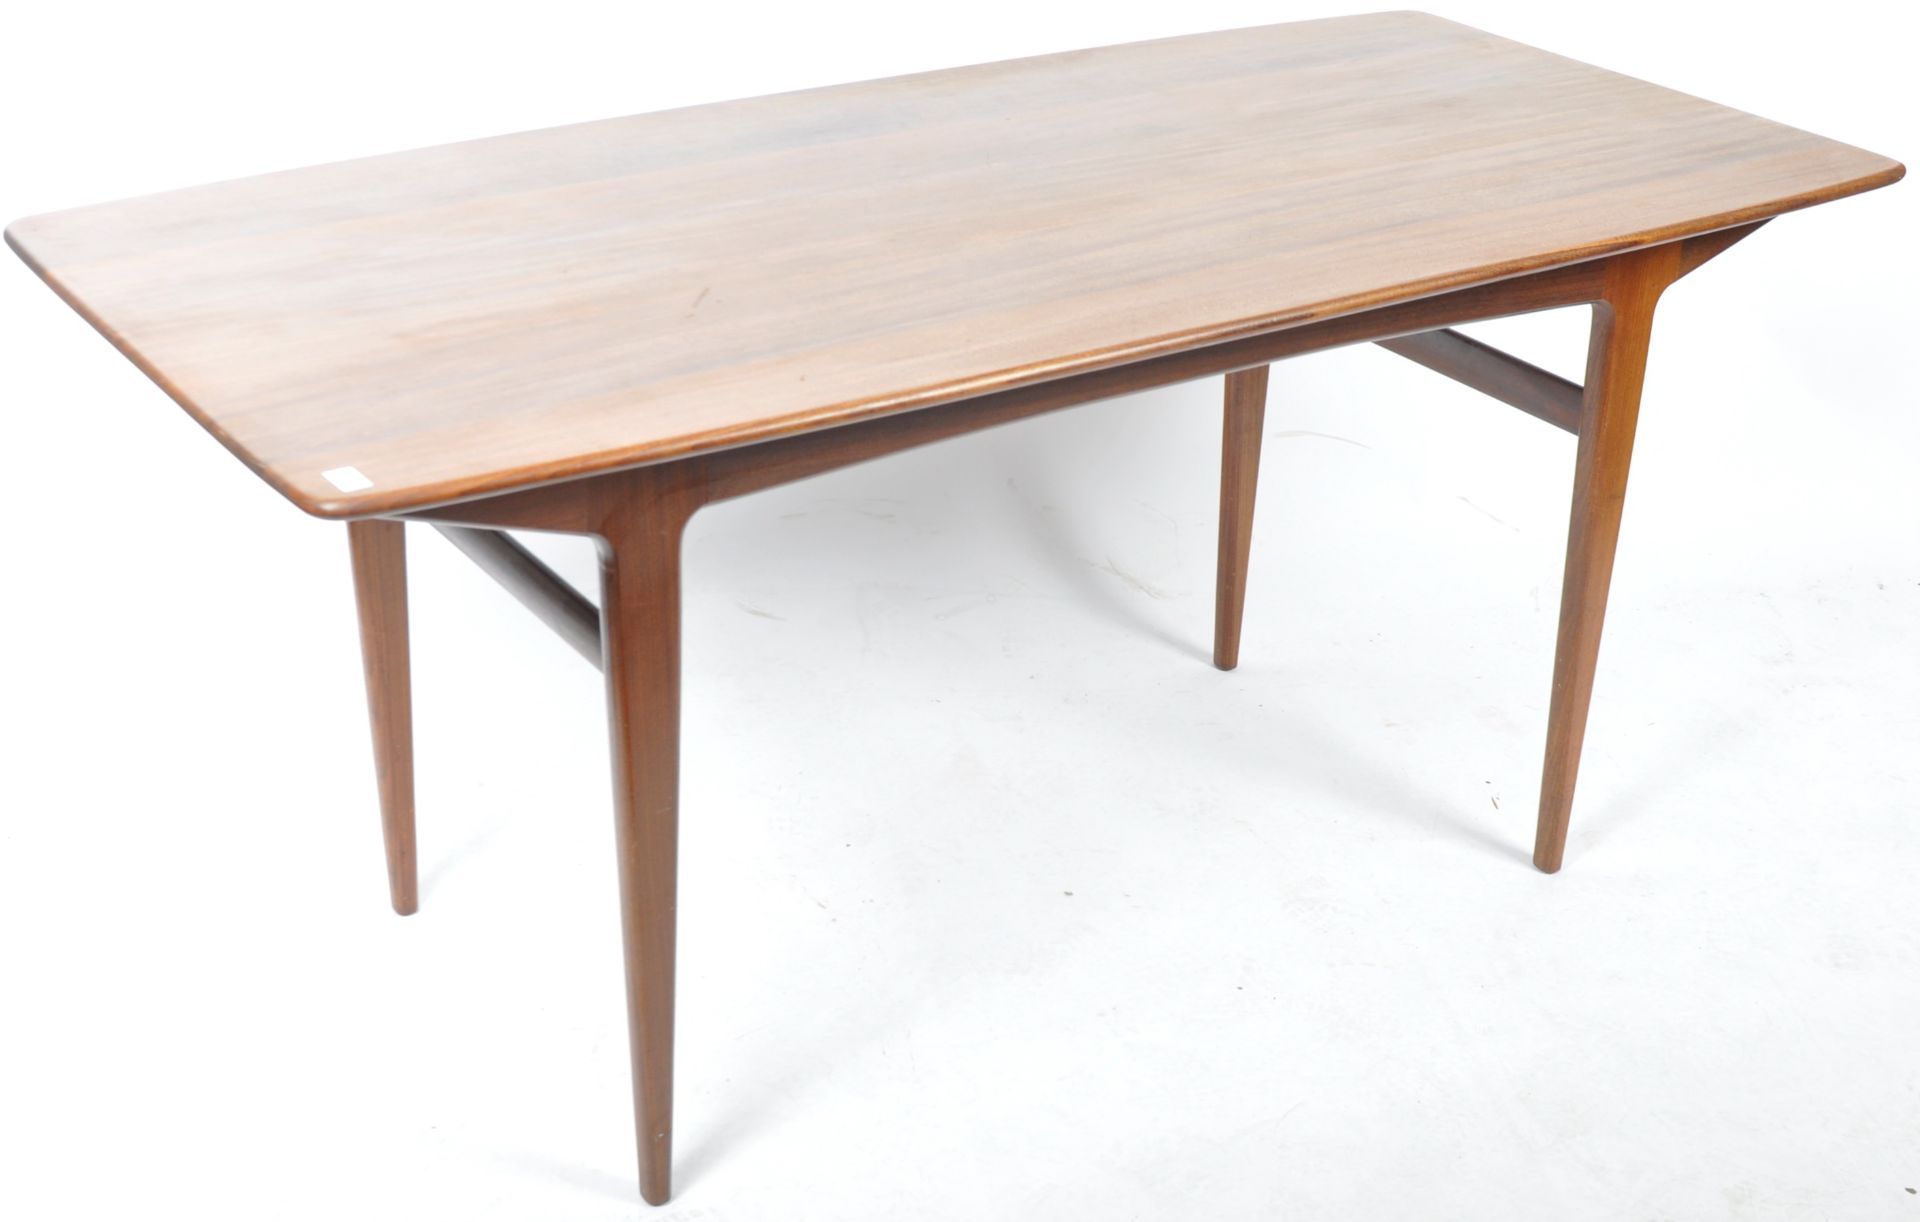 JOHN HERBERT FOR YOUNGERS MID CENTURY DINING TABLE - Image 2 of 4